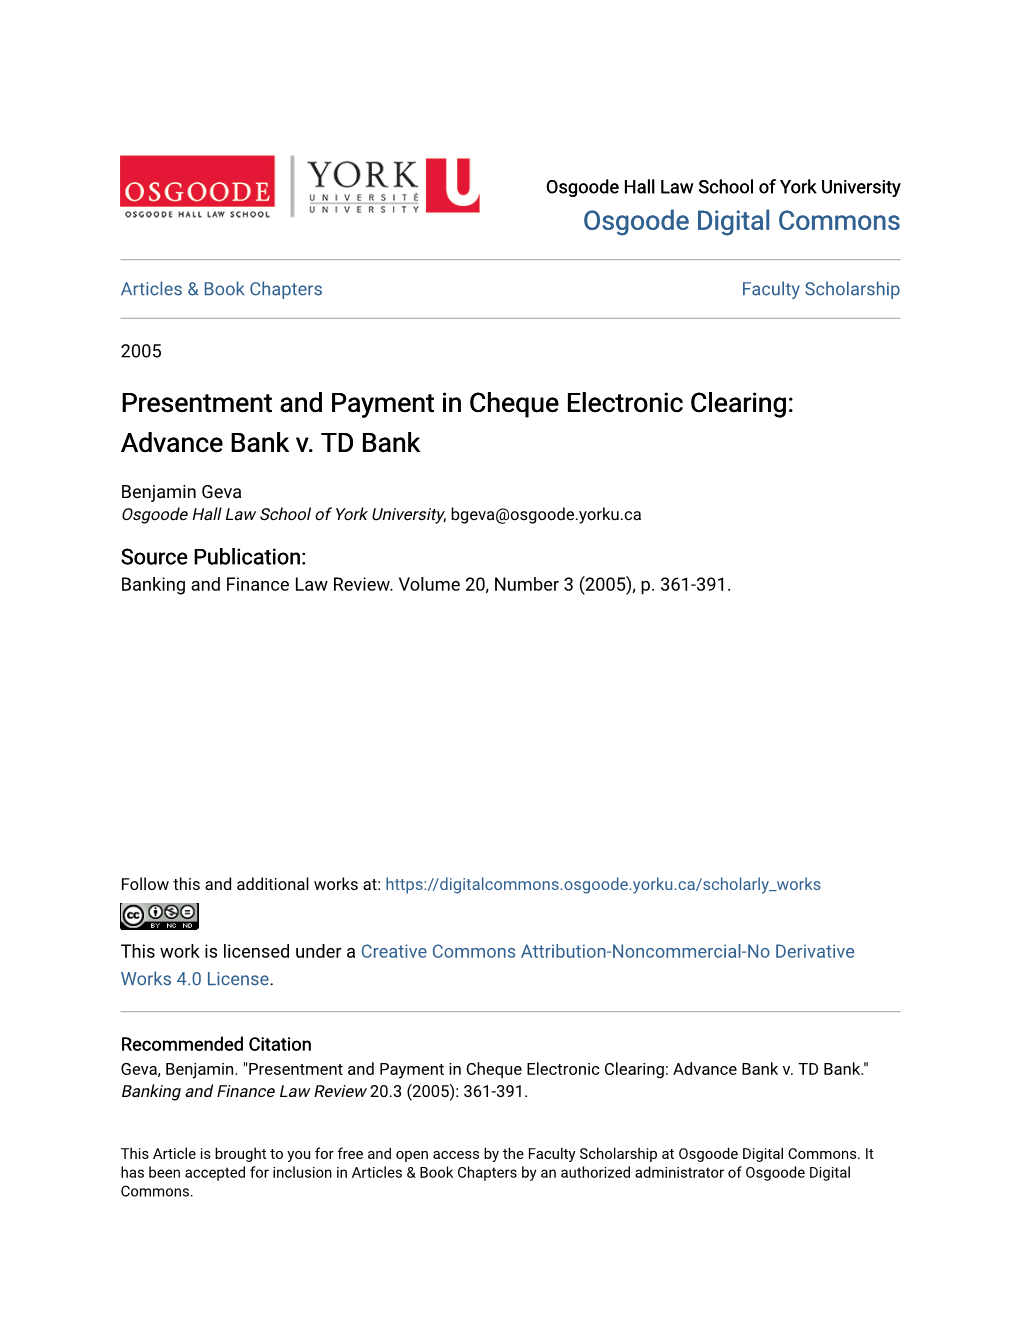 Presentment and Payment in Cheque Electronic Clearing: Advance Bank V. TD Bank